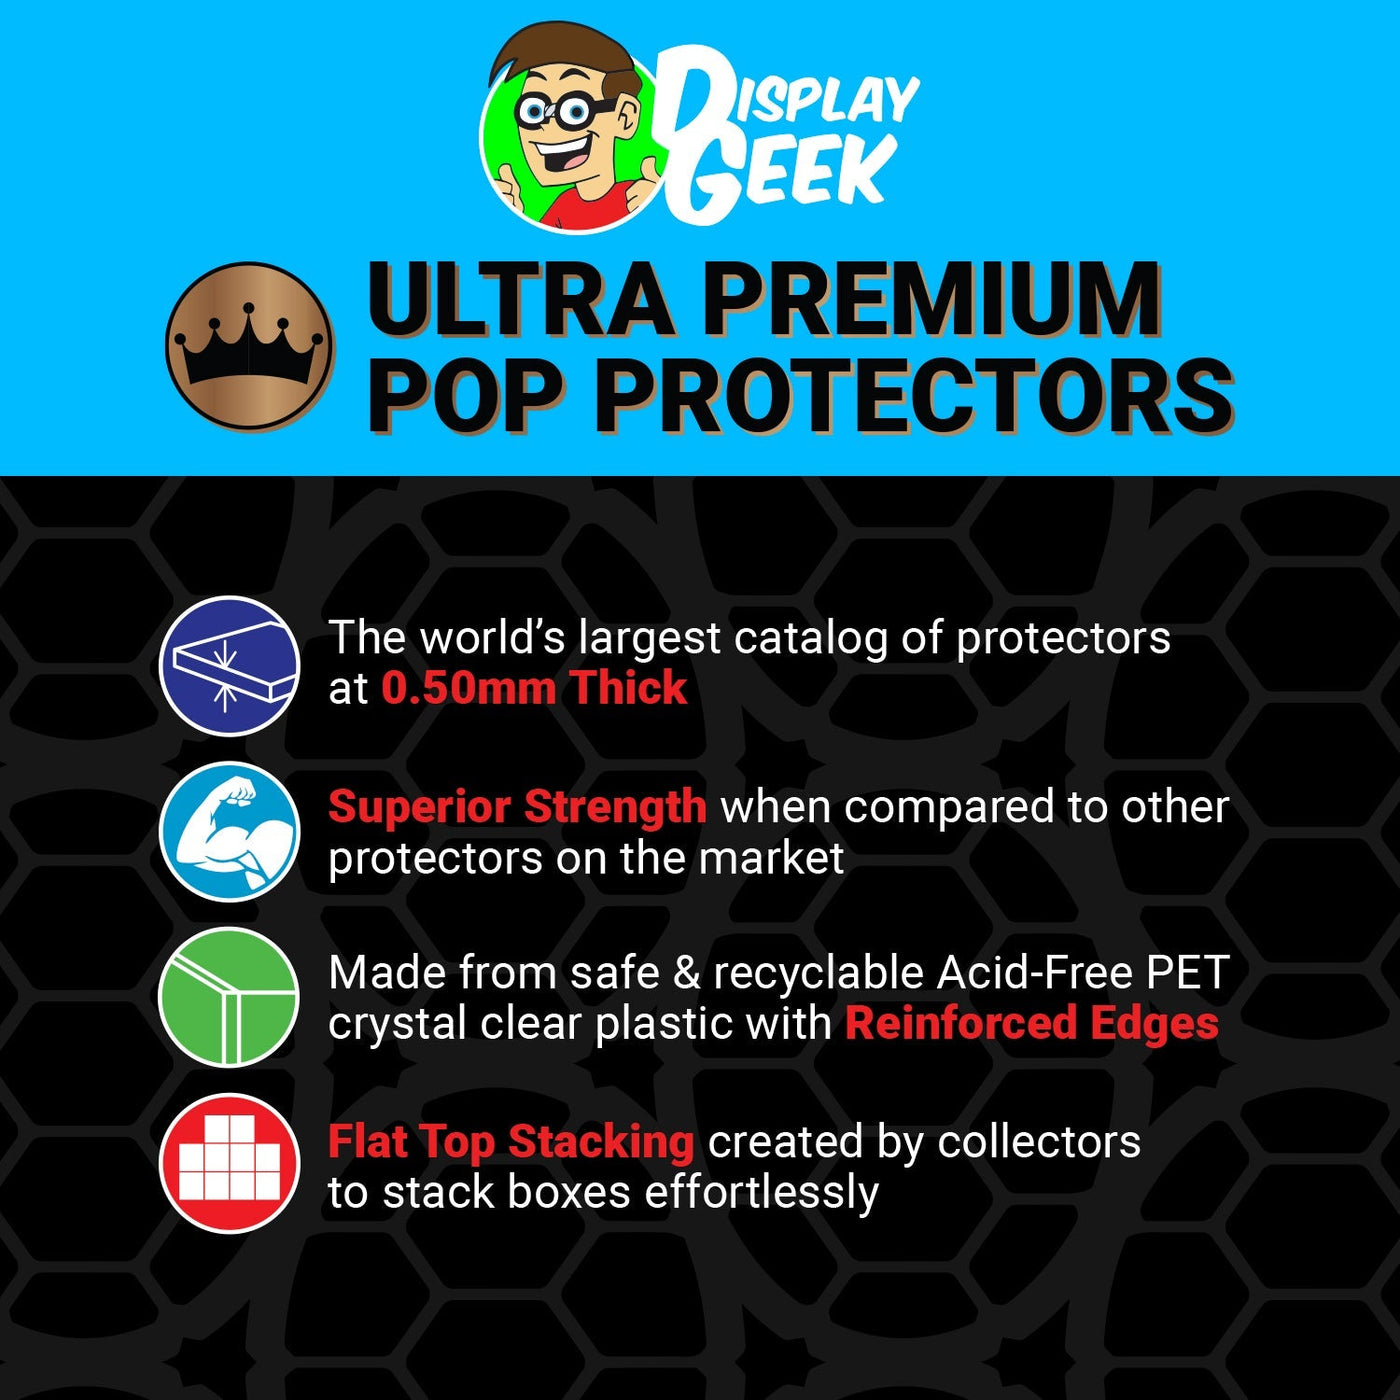 Pop Protector for Ant-Man Funko Pop Pez on The Protector Guide App by Display Geek